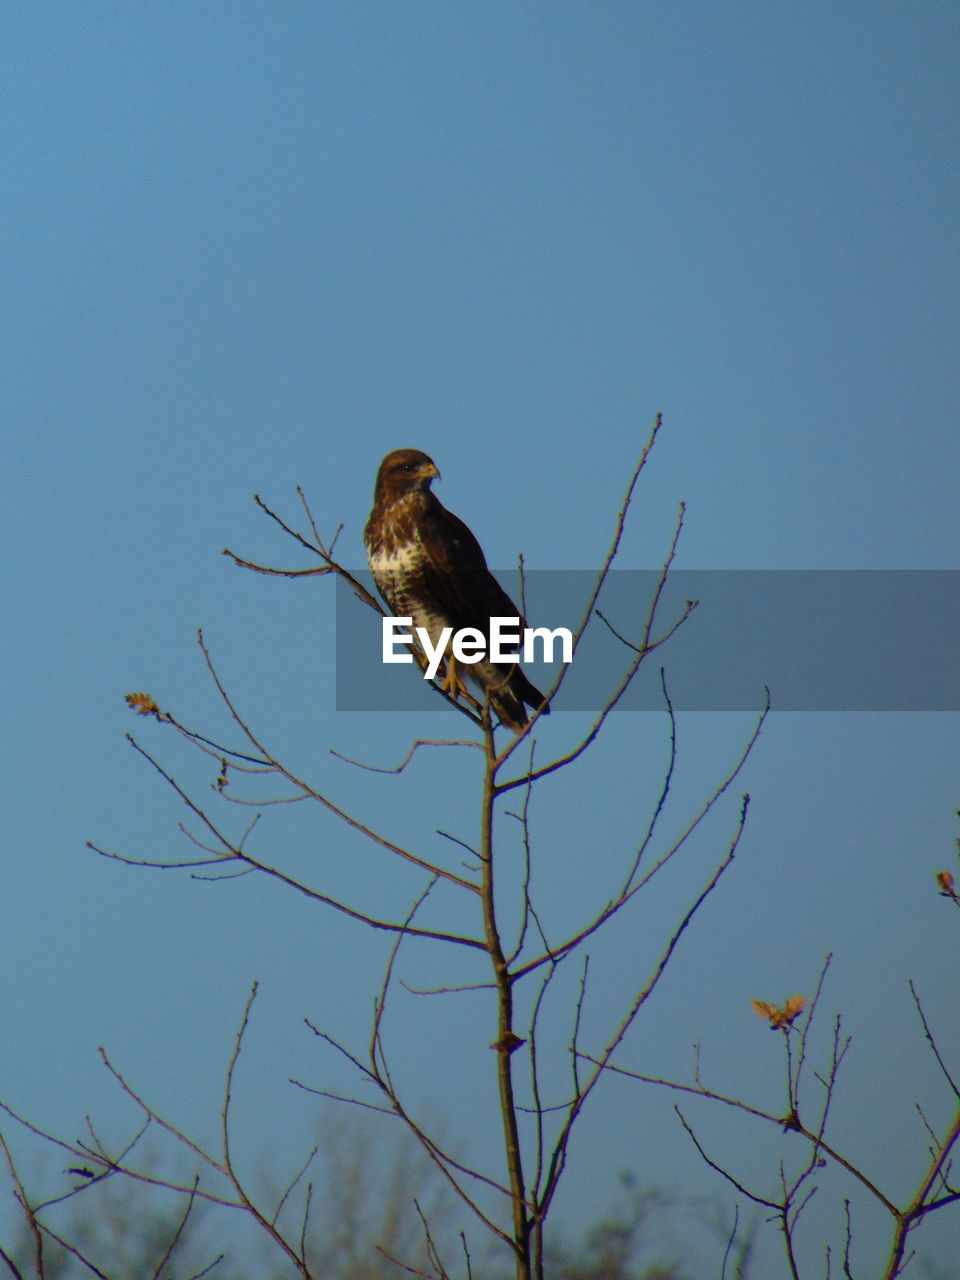 BIRDS PERCHING ON TREE AGAINST CLEAR SKY